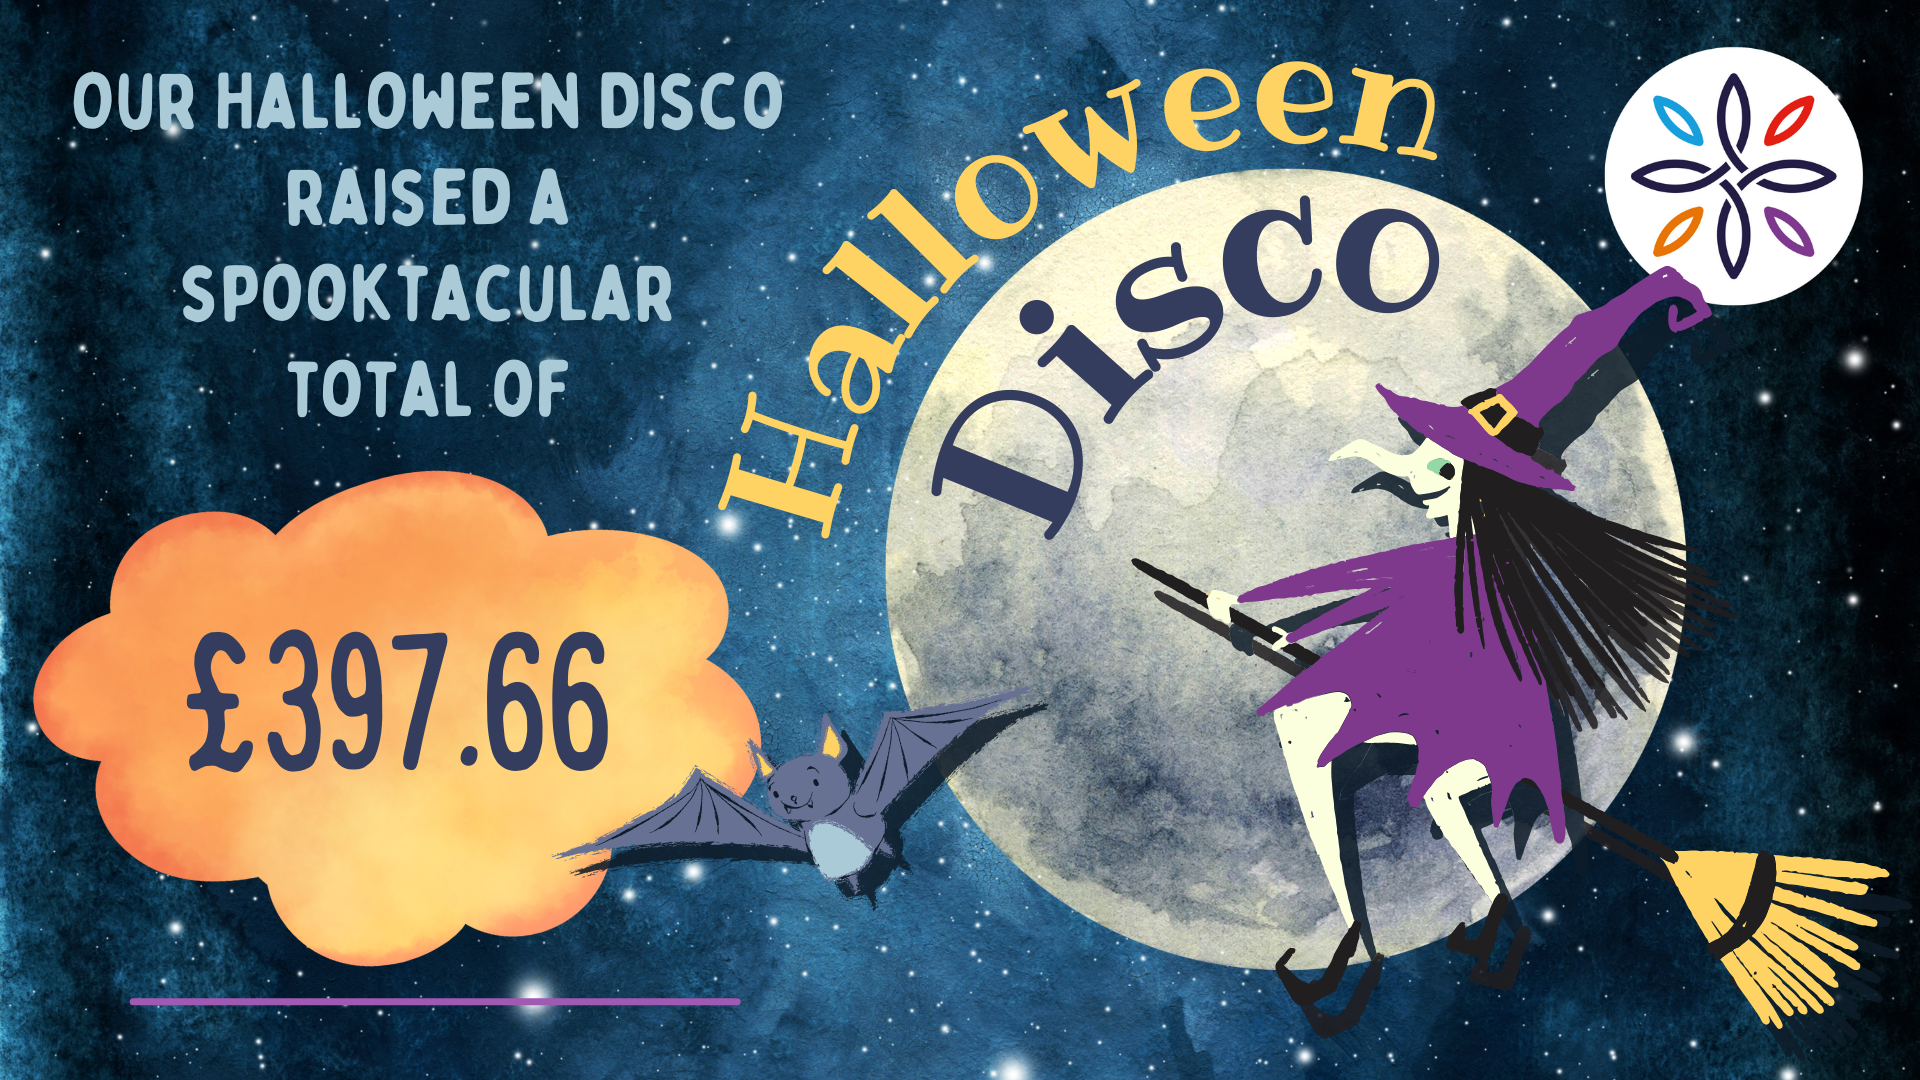 £397.66 raised from our Halloween Disco: